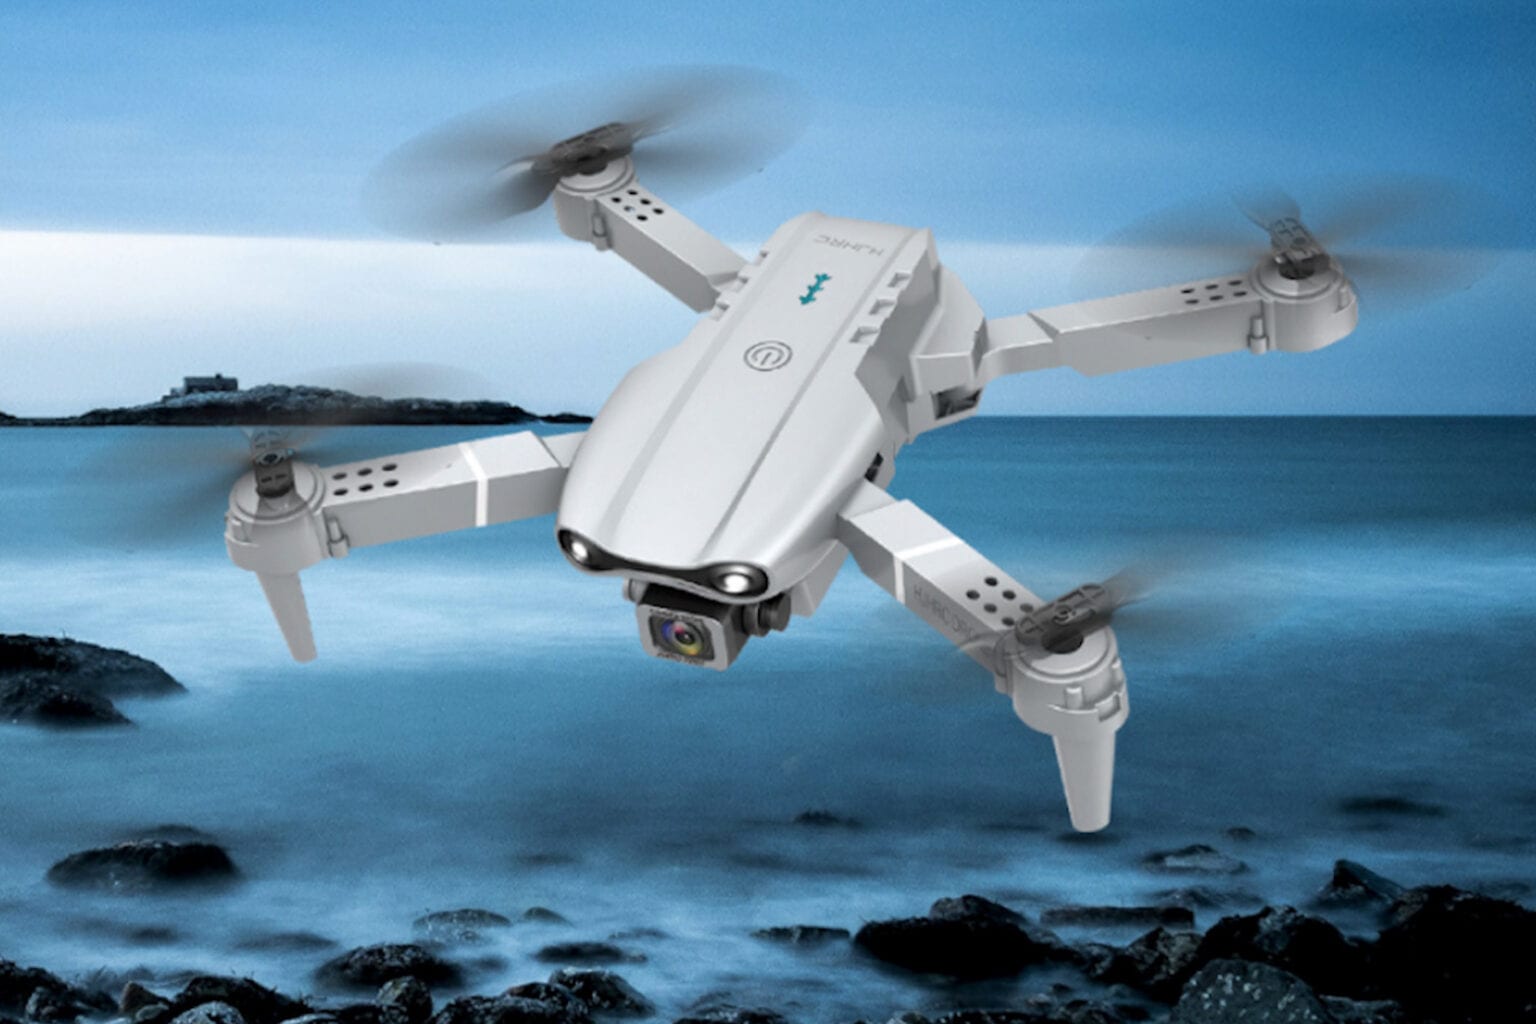 Get 2 powerful dual-cam drones for less than $150.